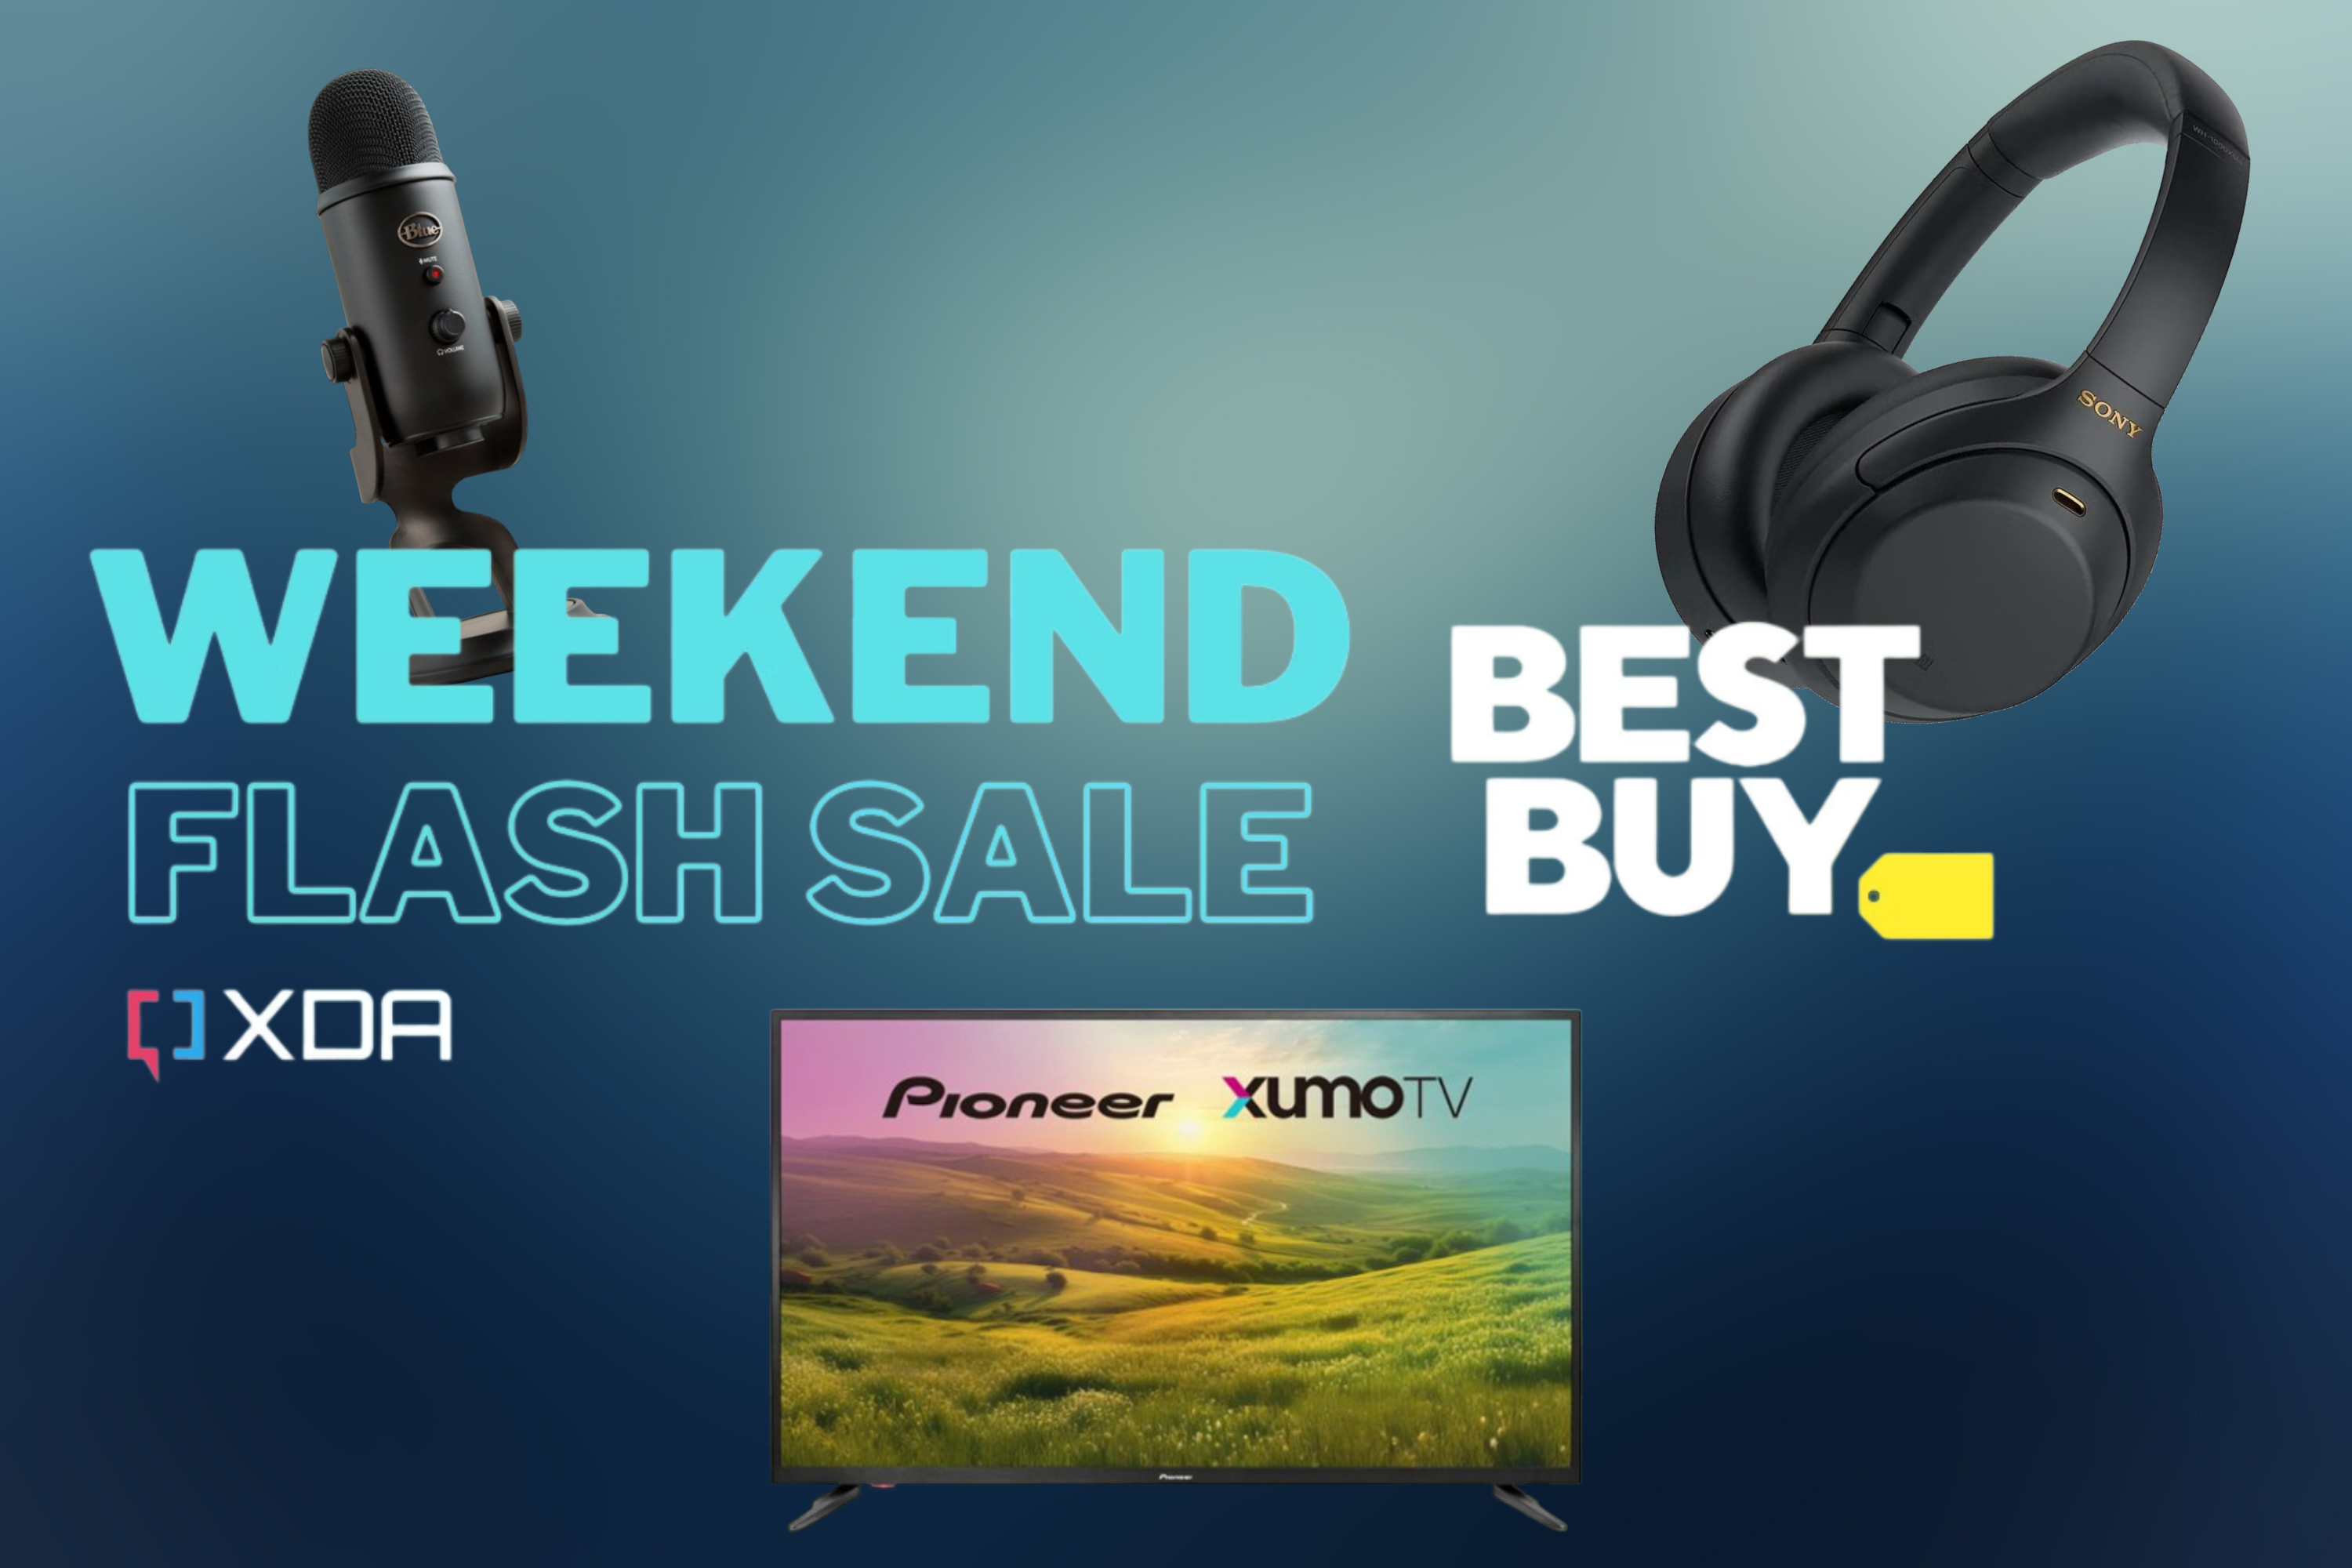 Best Buy Flash Sale banner with products 